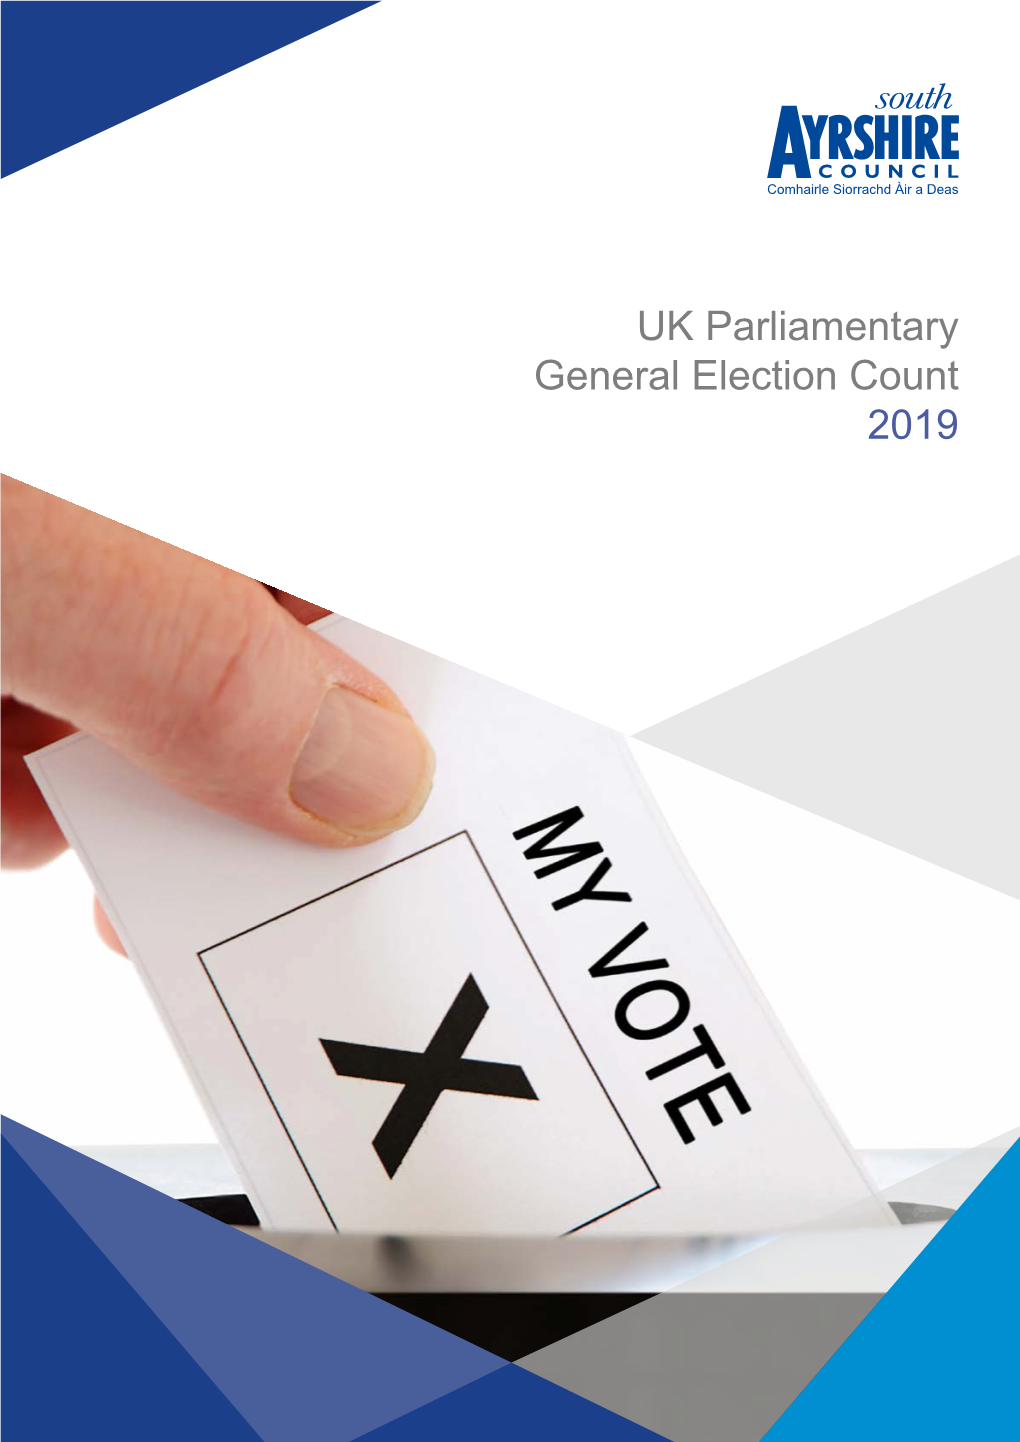 UK Parliamentary General Election Count 2019 Welcome